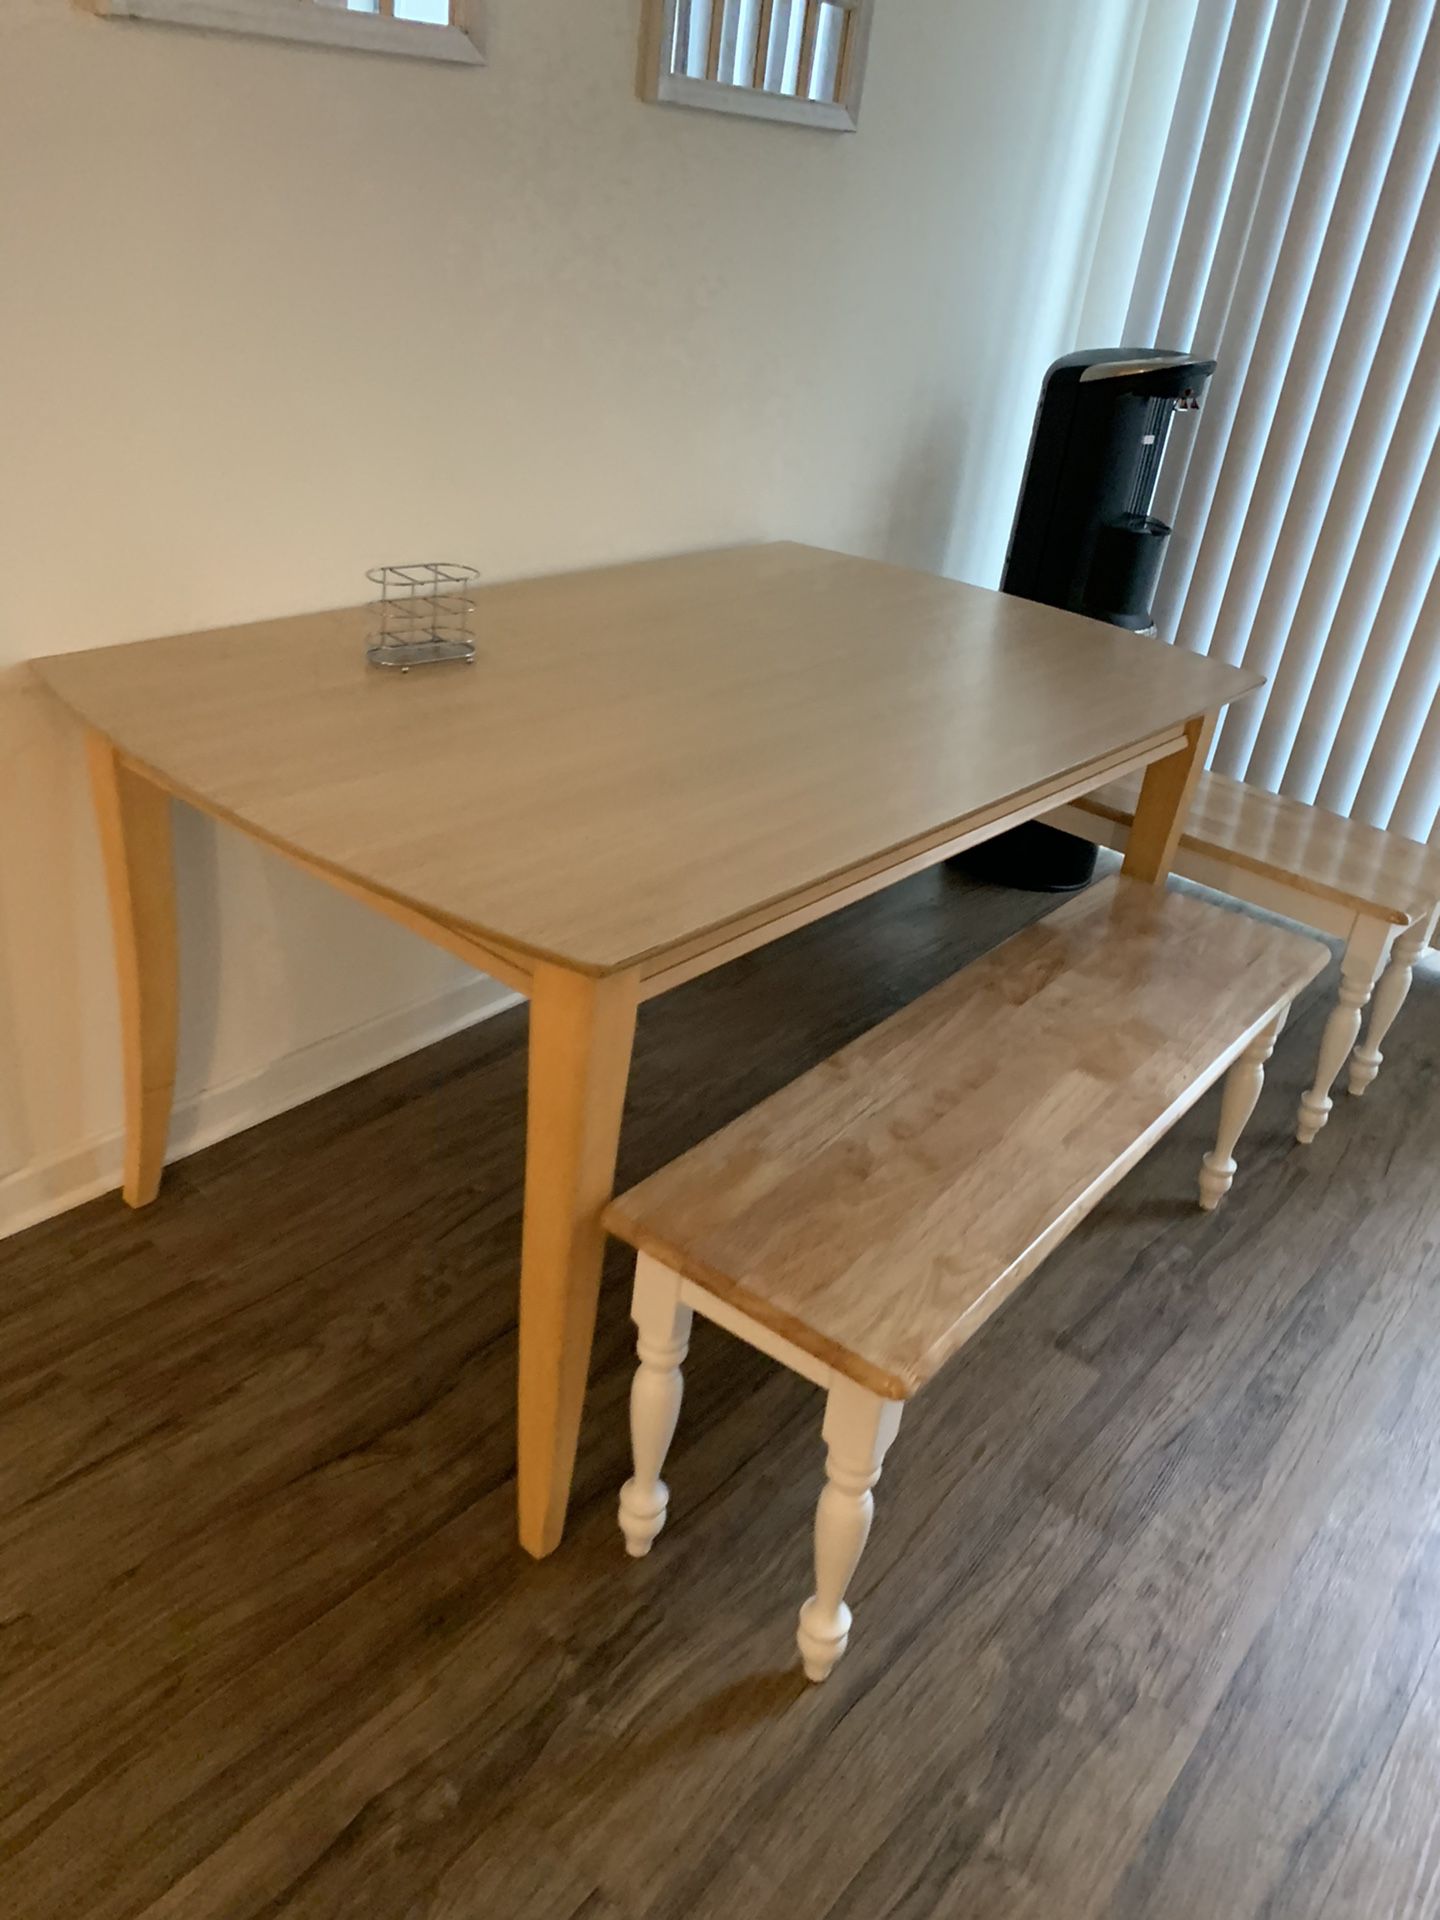 Wooden kitchen table and Benches